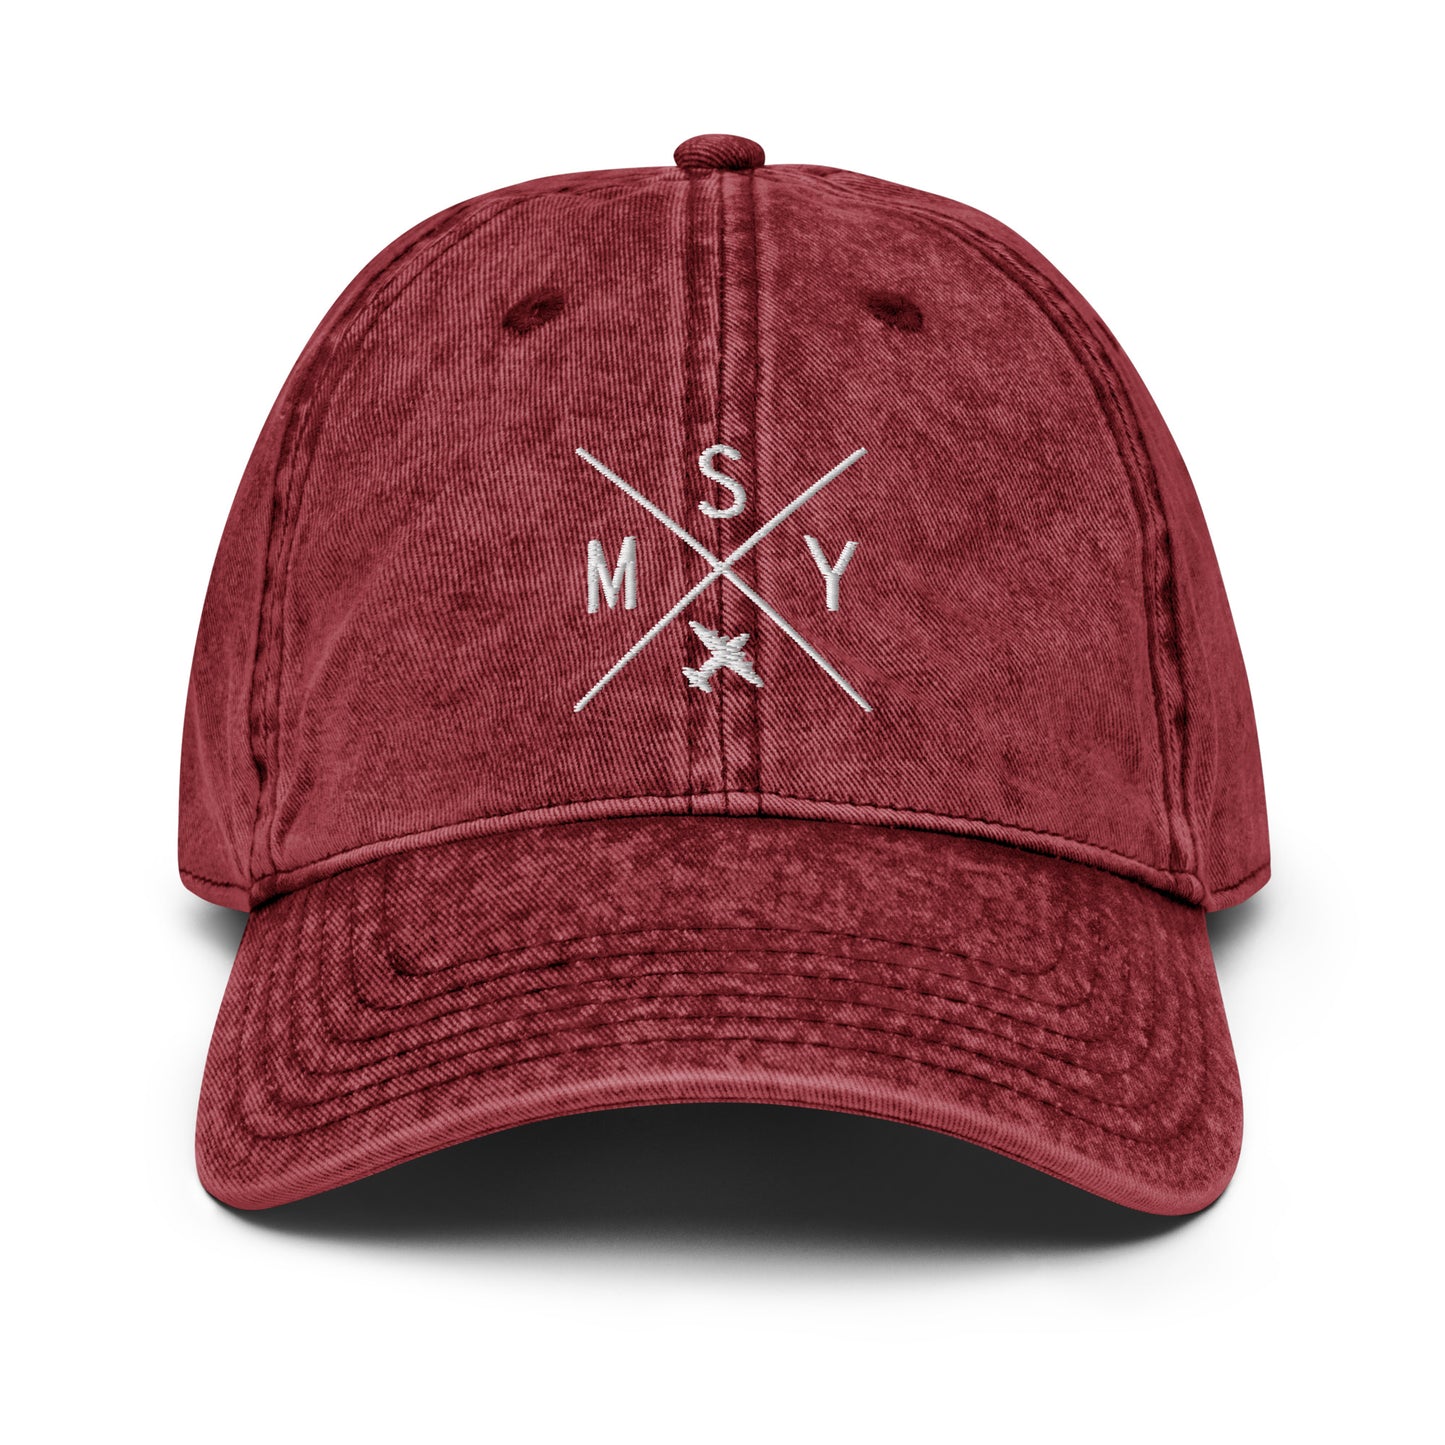 Crossed-X Cotton Twill Cap - White • MSY New Orleans • YHM Designs - Image 22